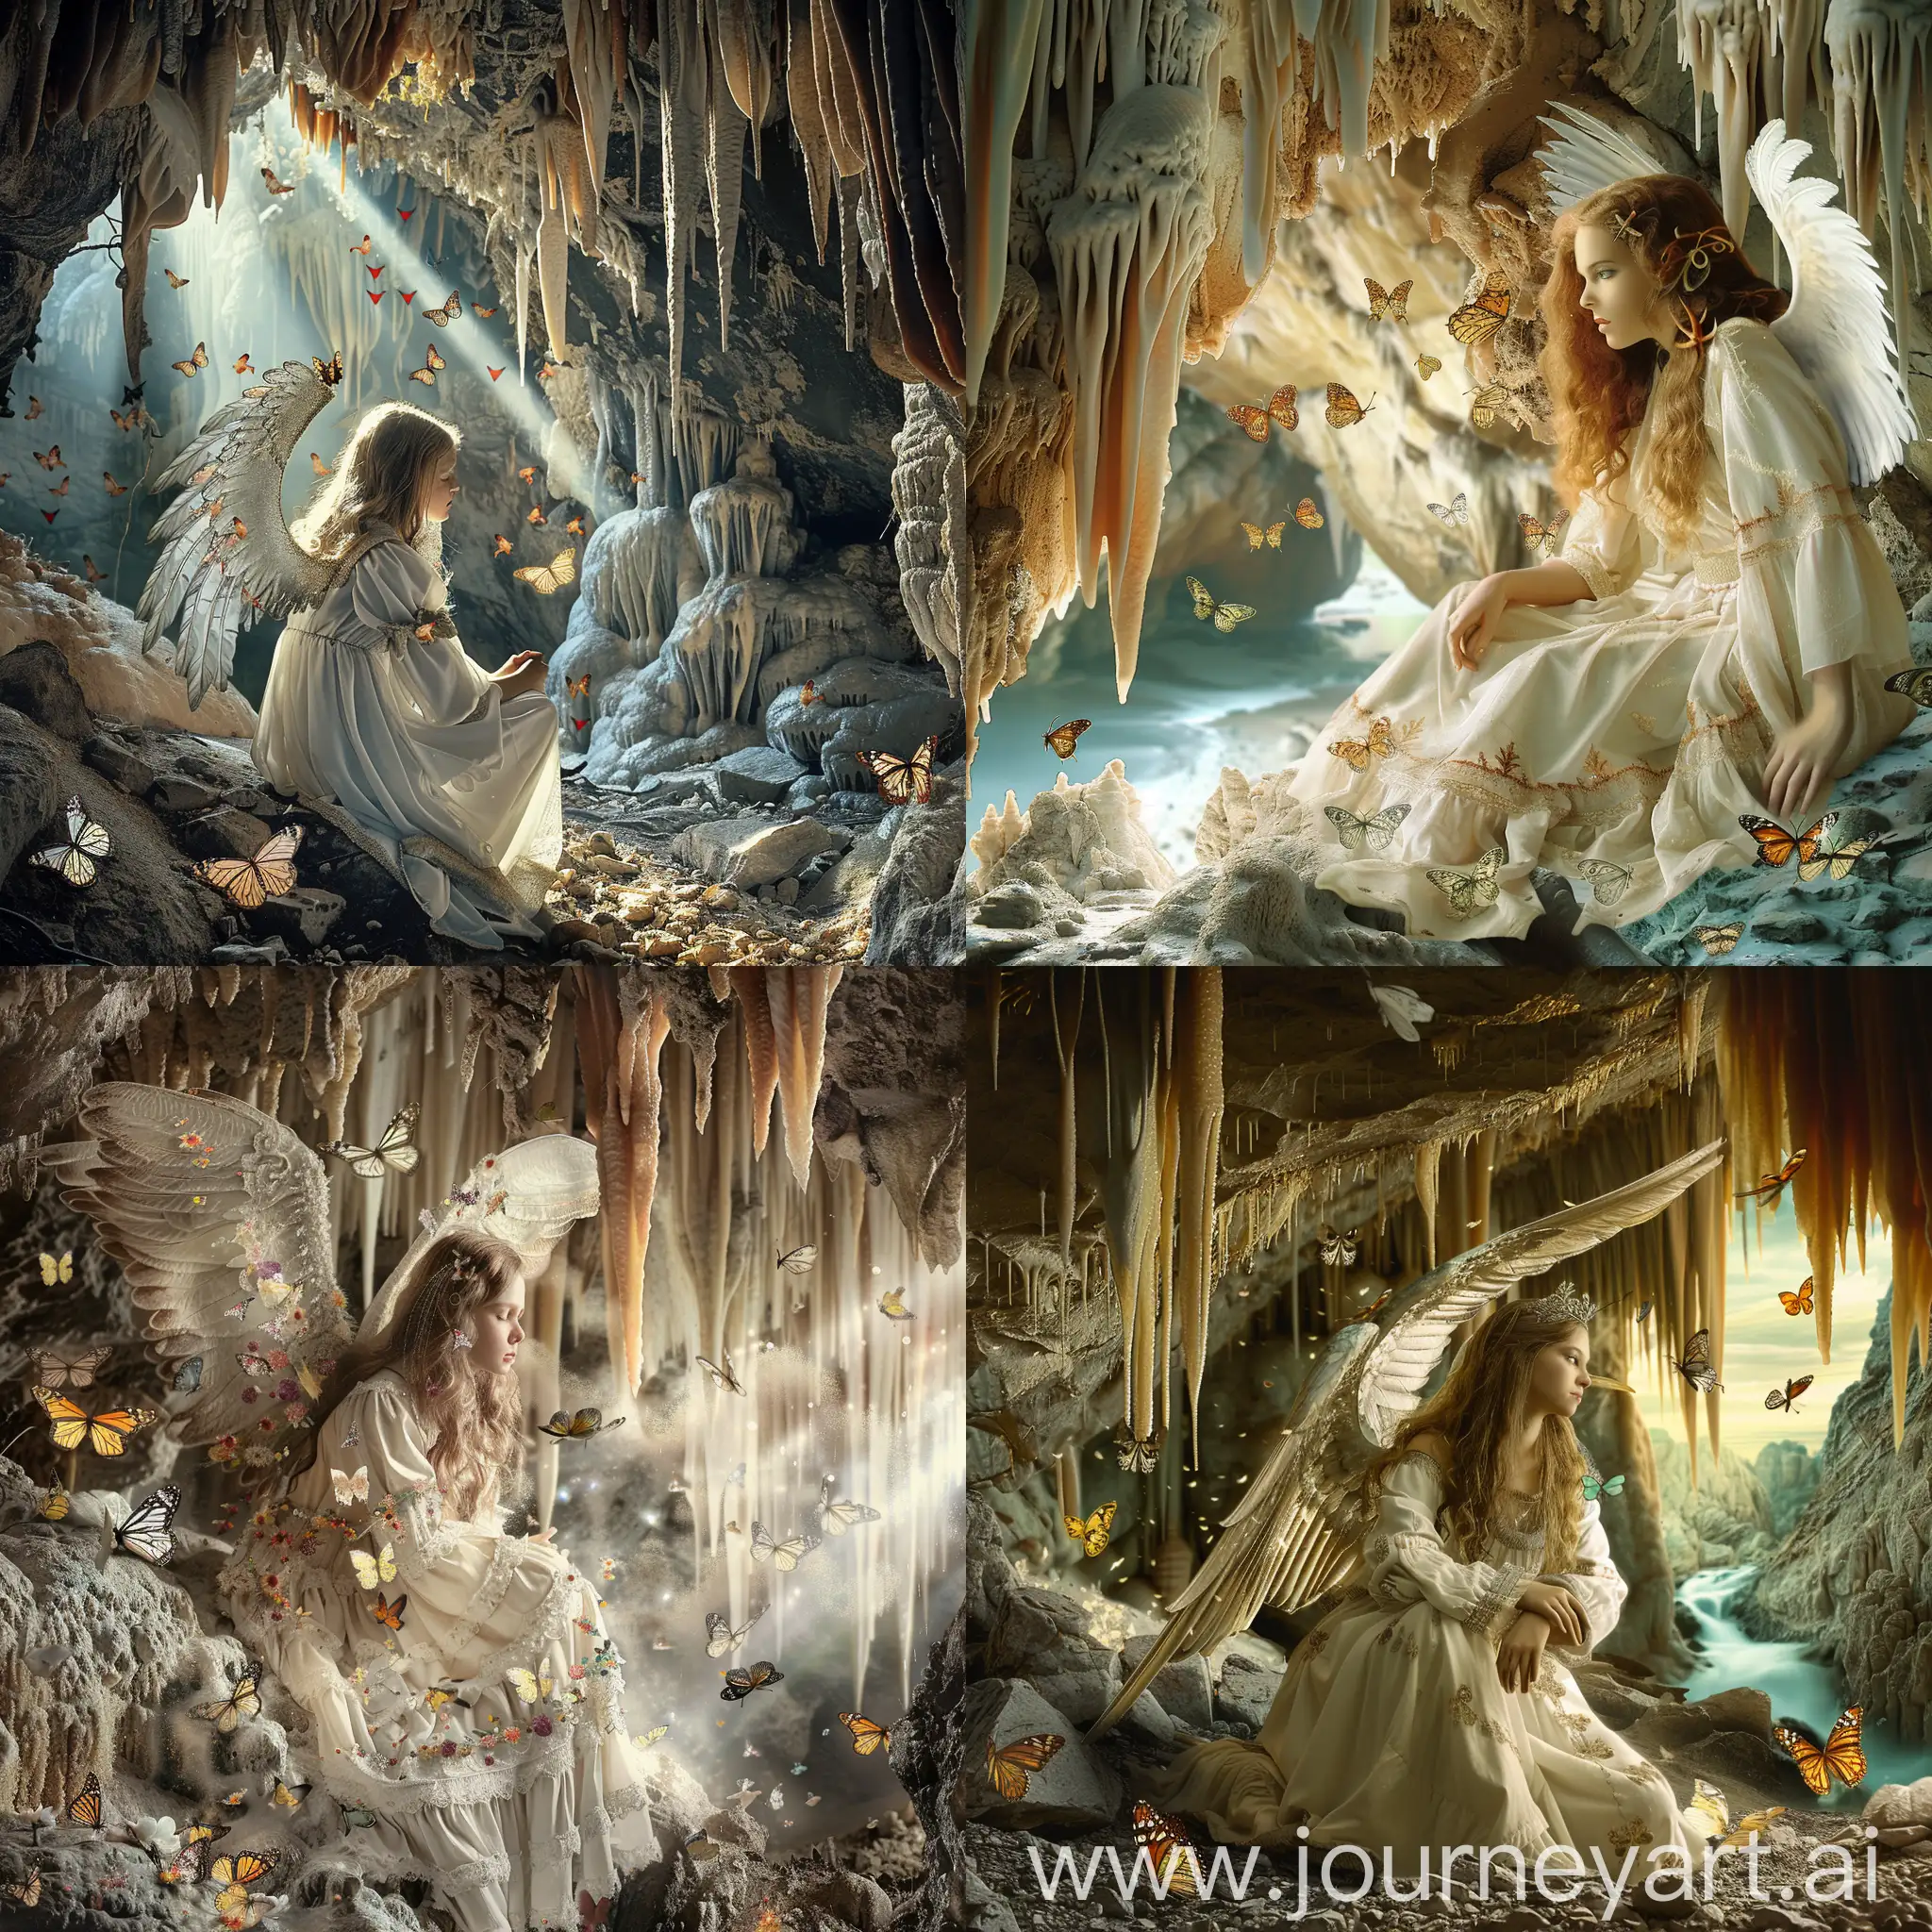 A beautiful medieval angel in a cave with stalagmites and stalactites and butterflies